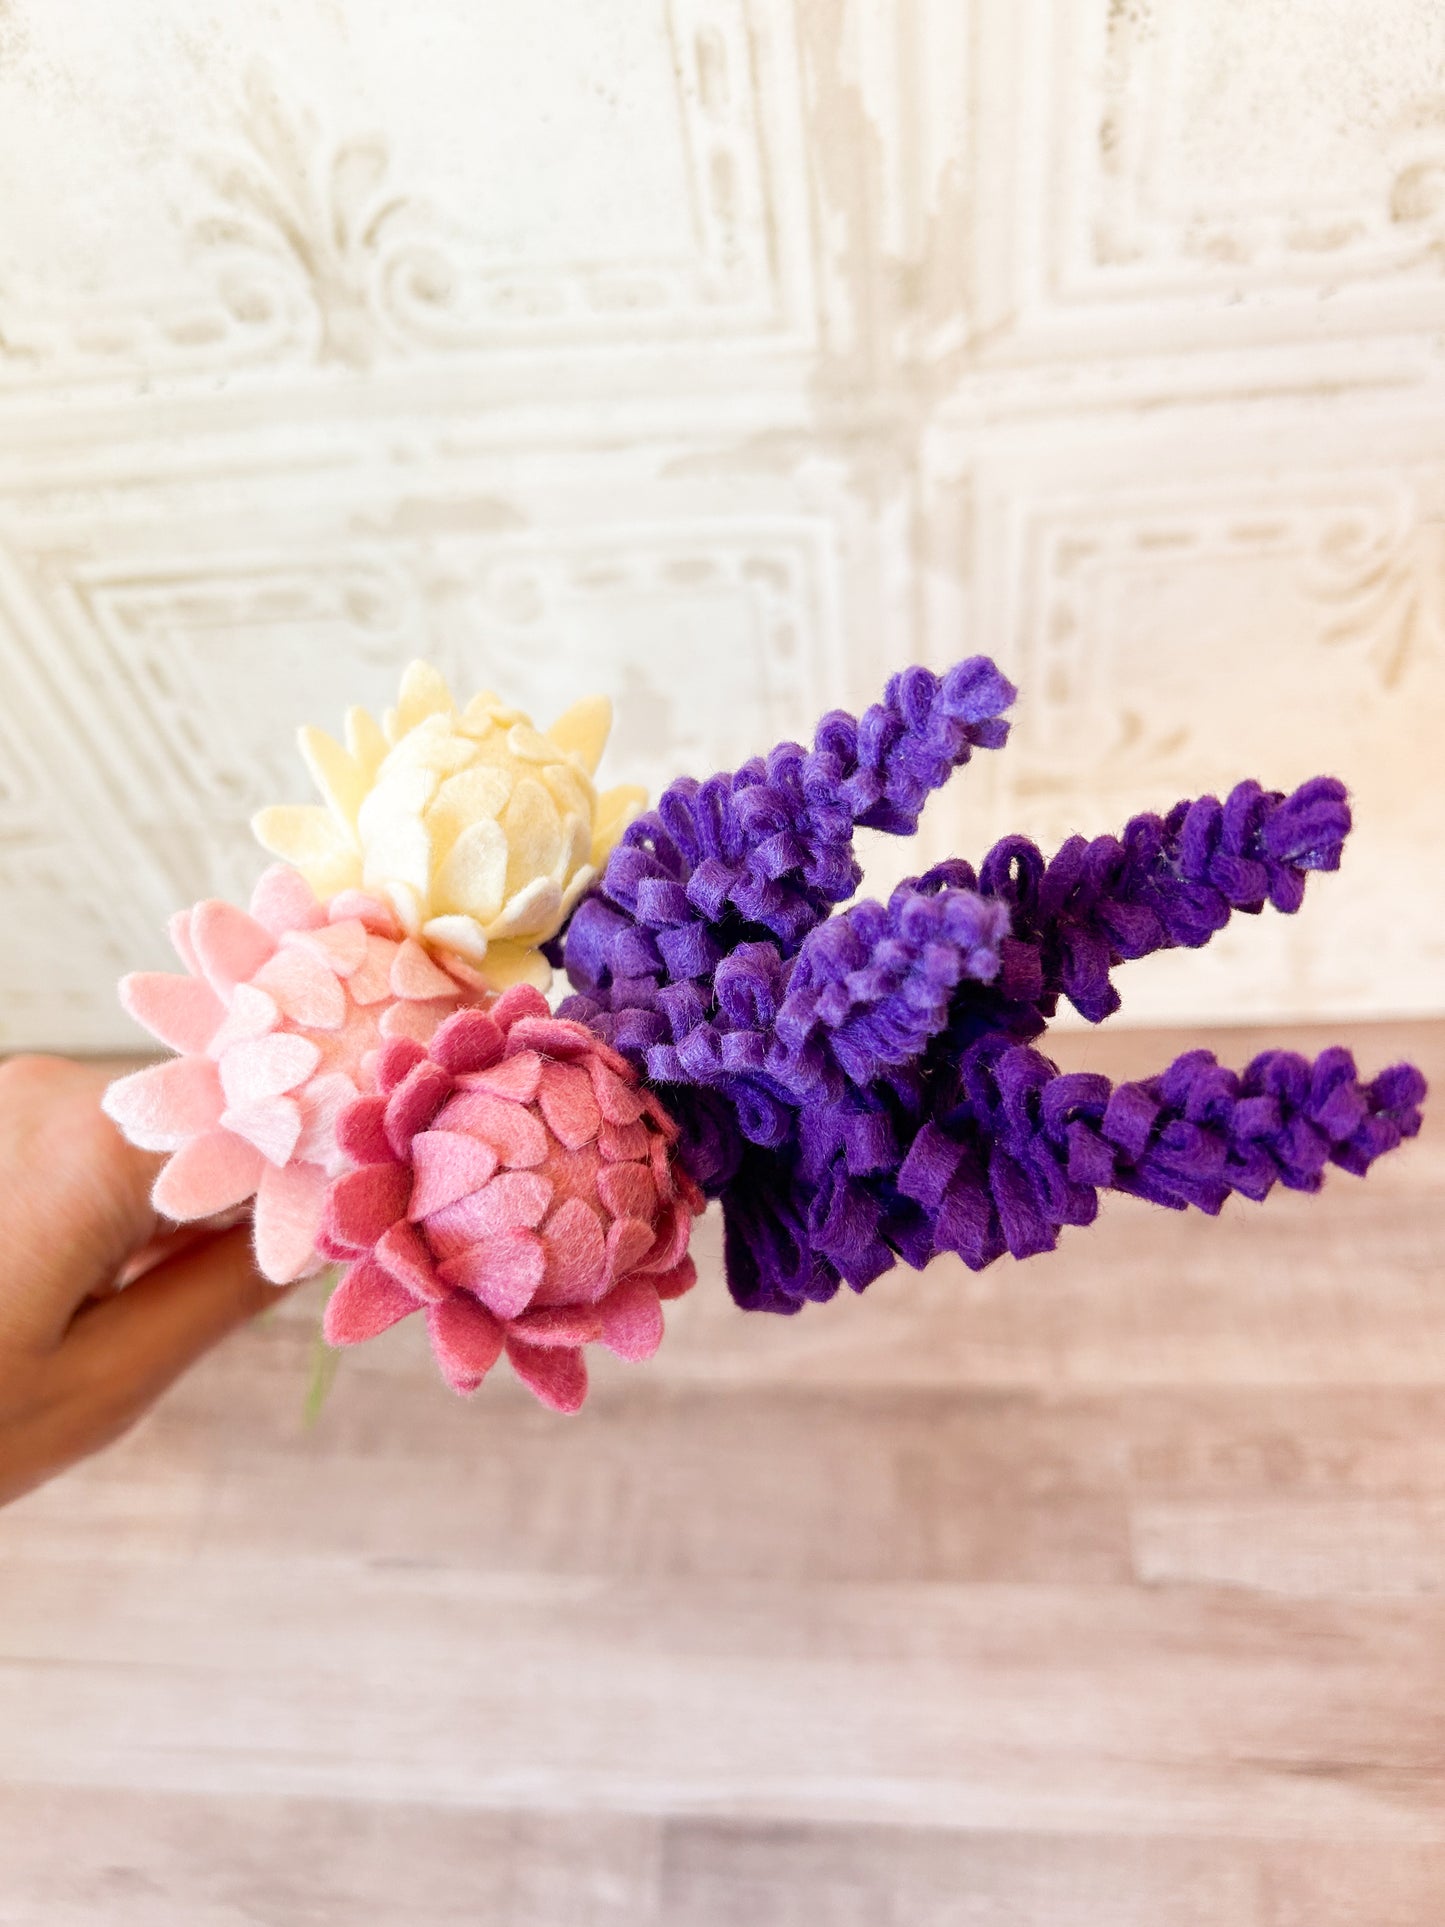 Pink and Cream Dahlia Stems with Lavender Floral Bouquet